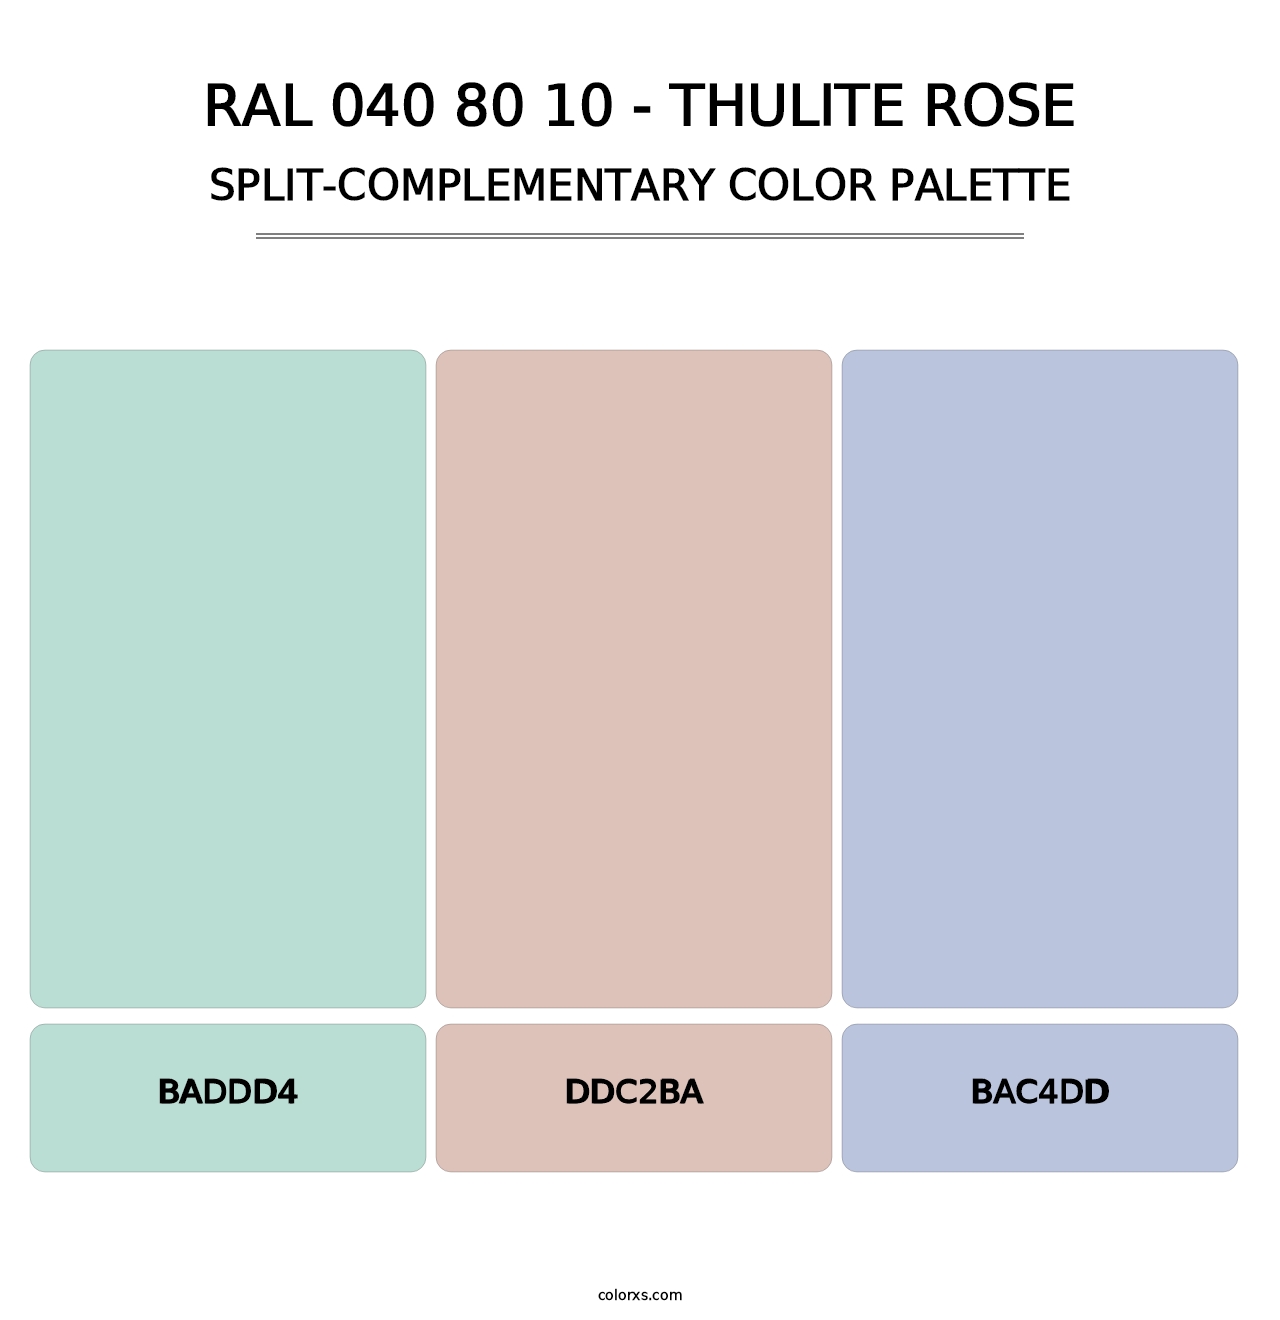 RAL 040 80 10 - Thulite Rose - Split-Complementary Color Palette